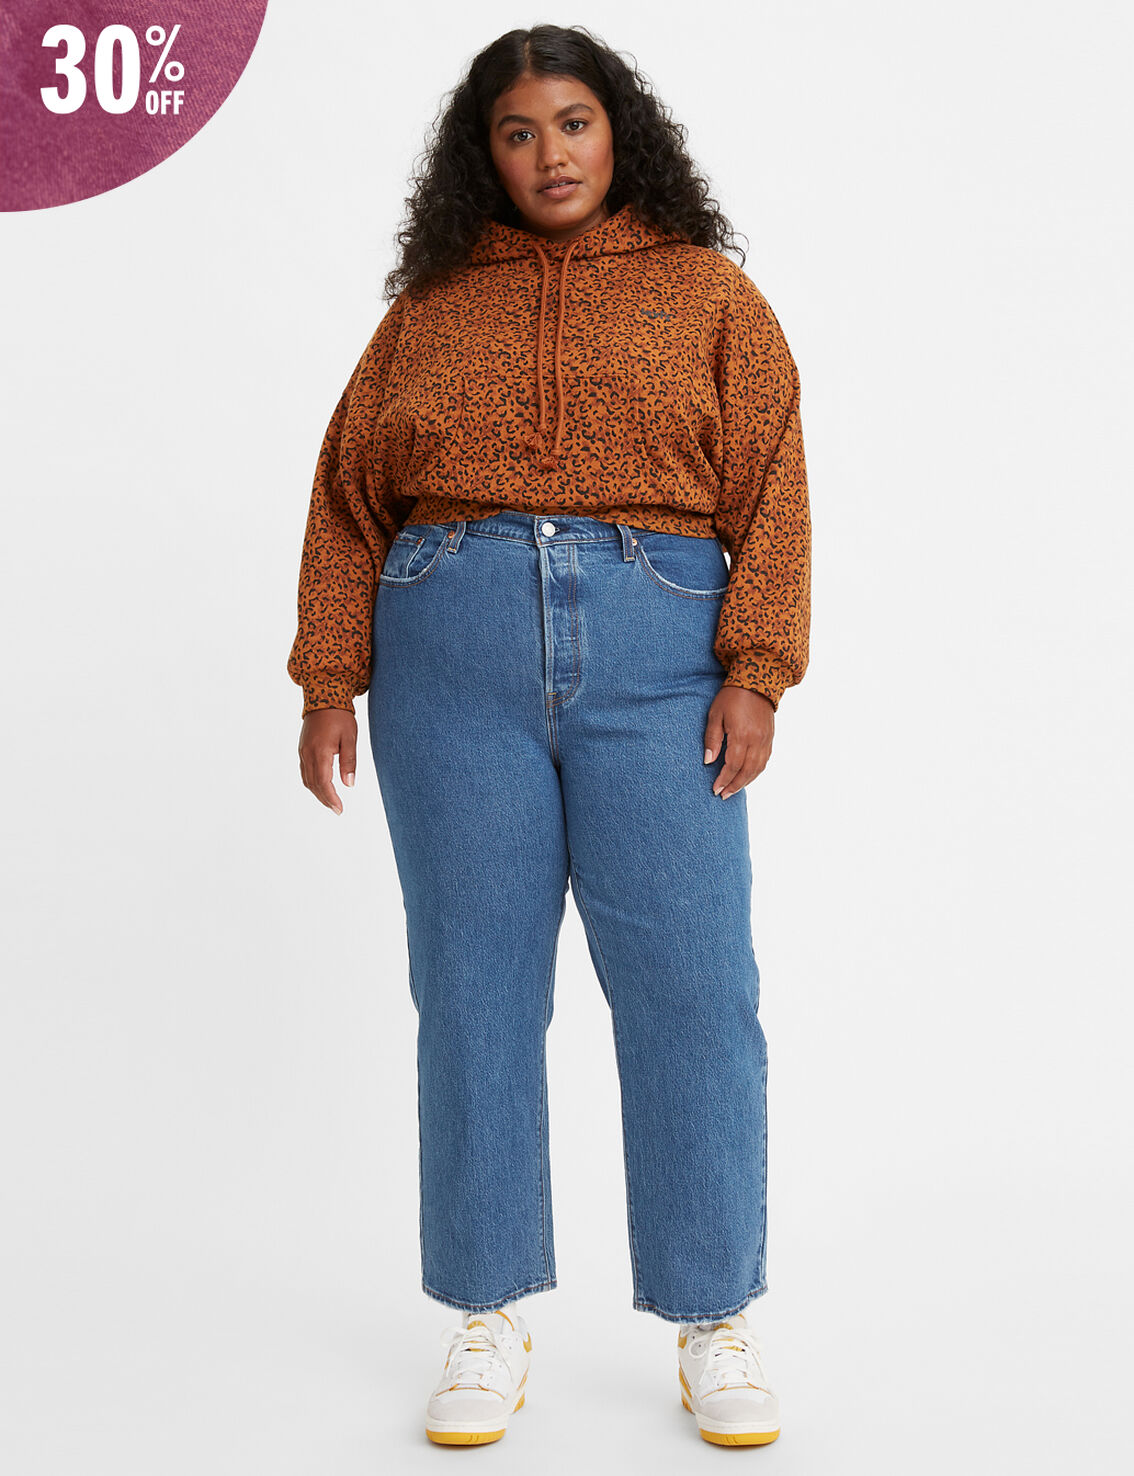 Ribcage Straight Ankle Jeans (Plus Size) in Jazz Pop